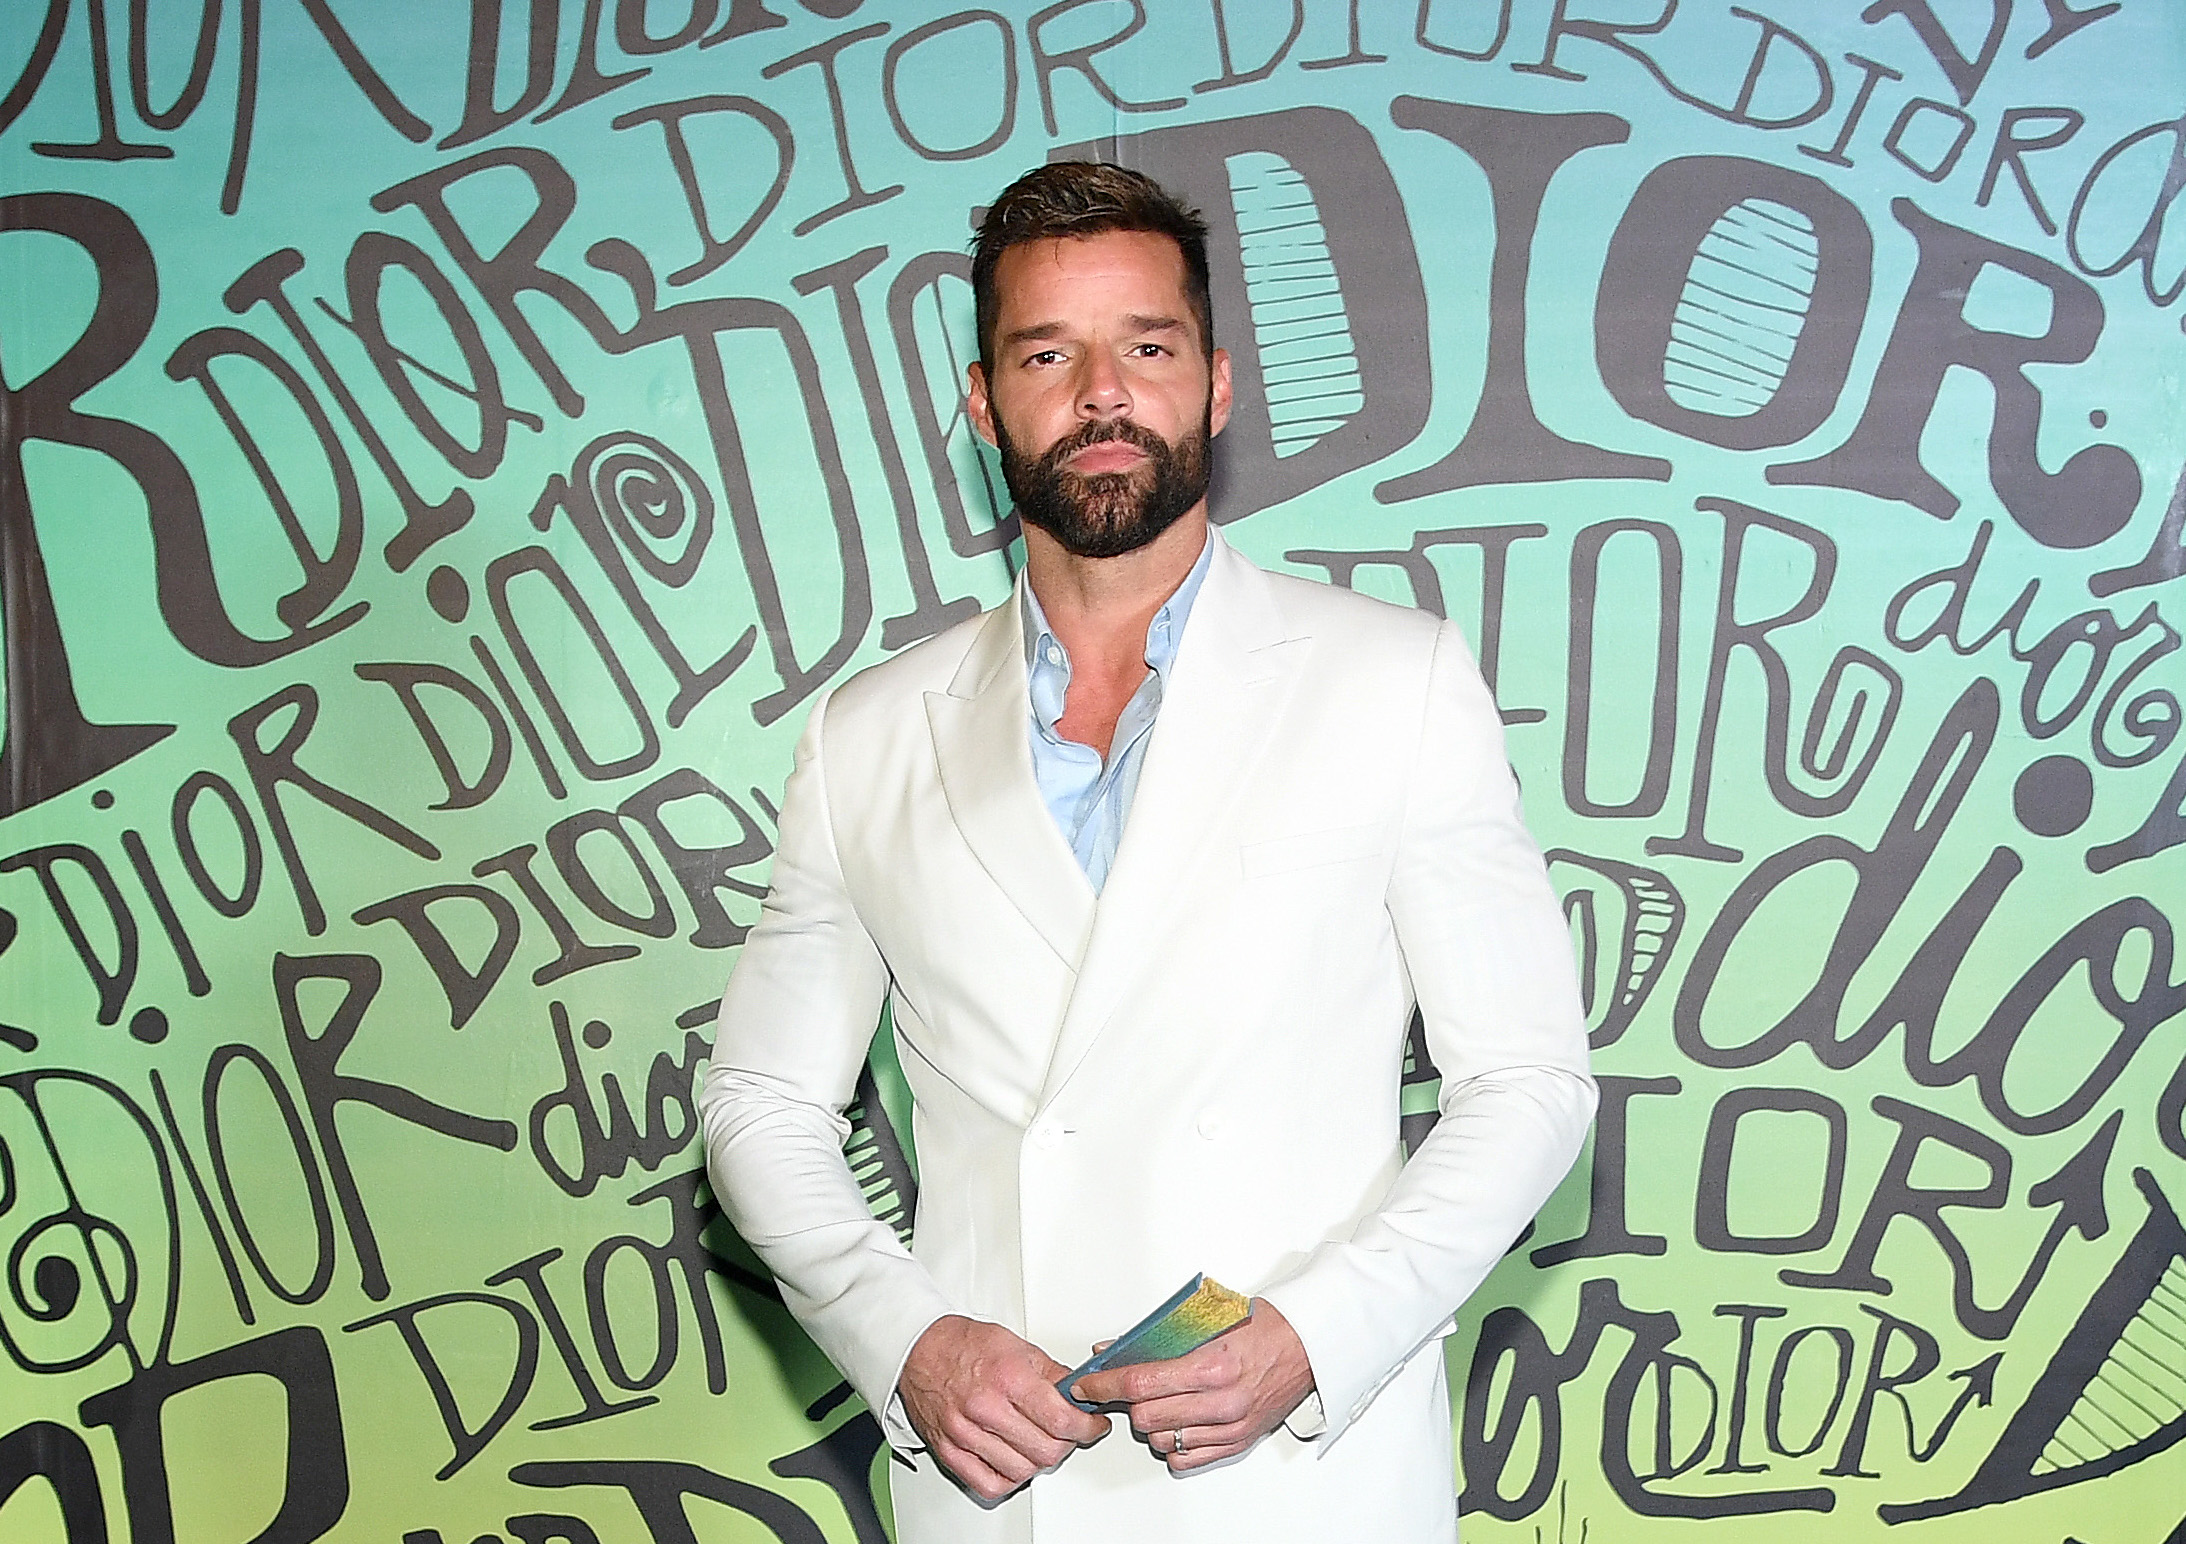 Ricky Martin attends the Dior Men's Fall 2020 Runway Show. Photo by Dimitrios Kambouris/Getty Images for Dior Men